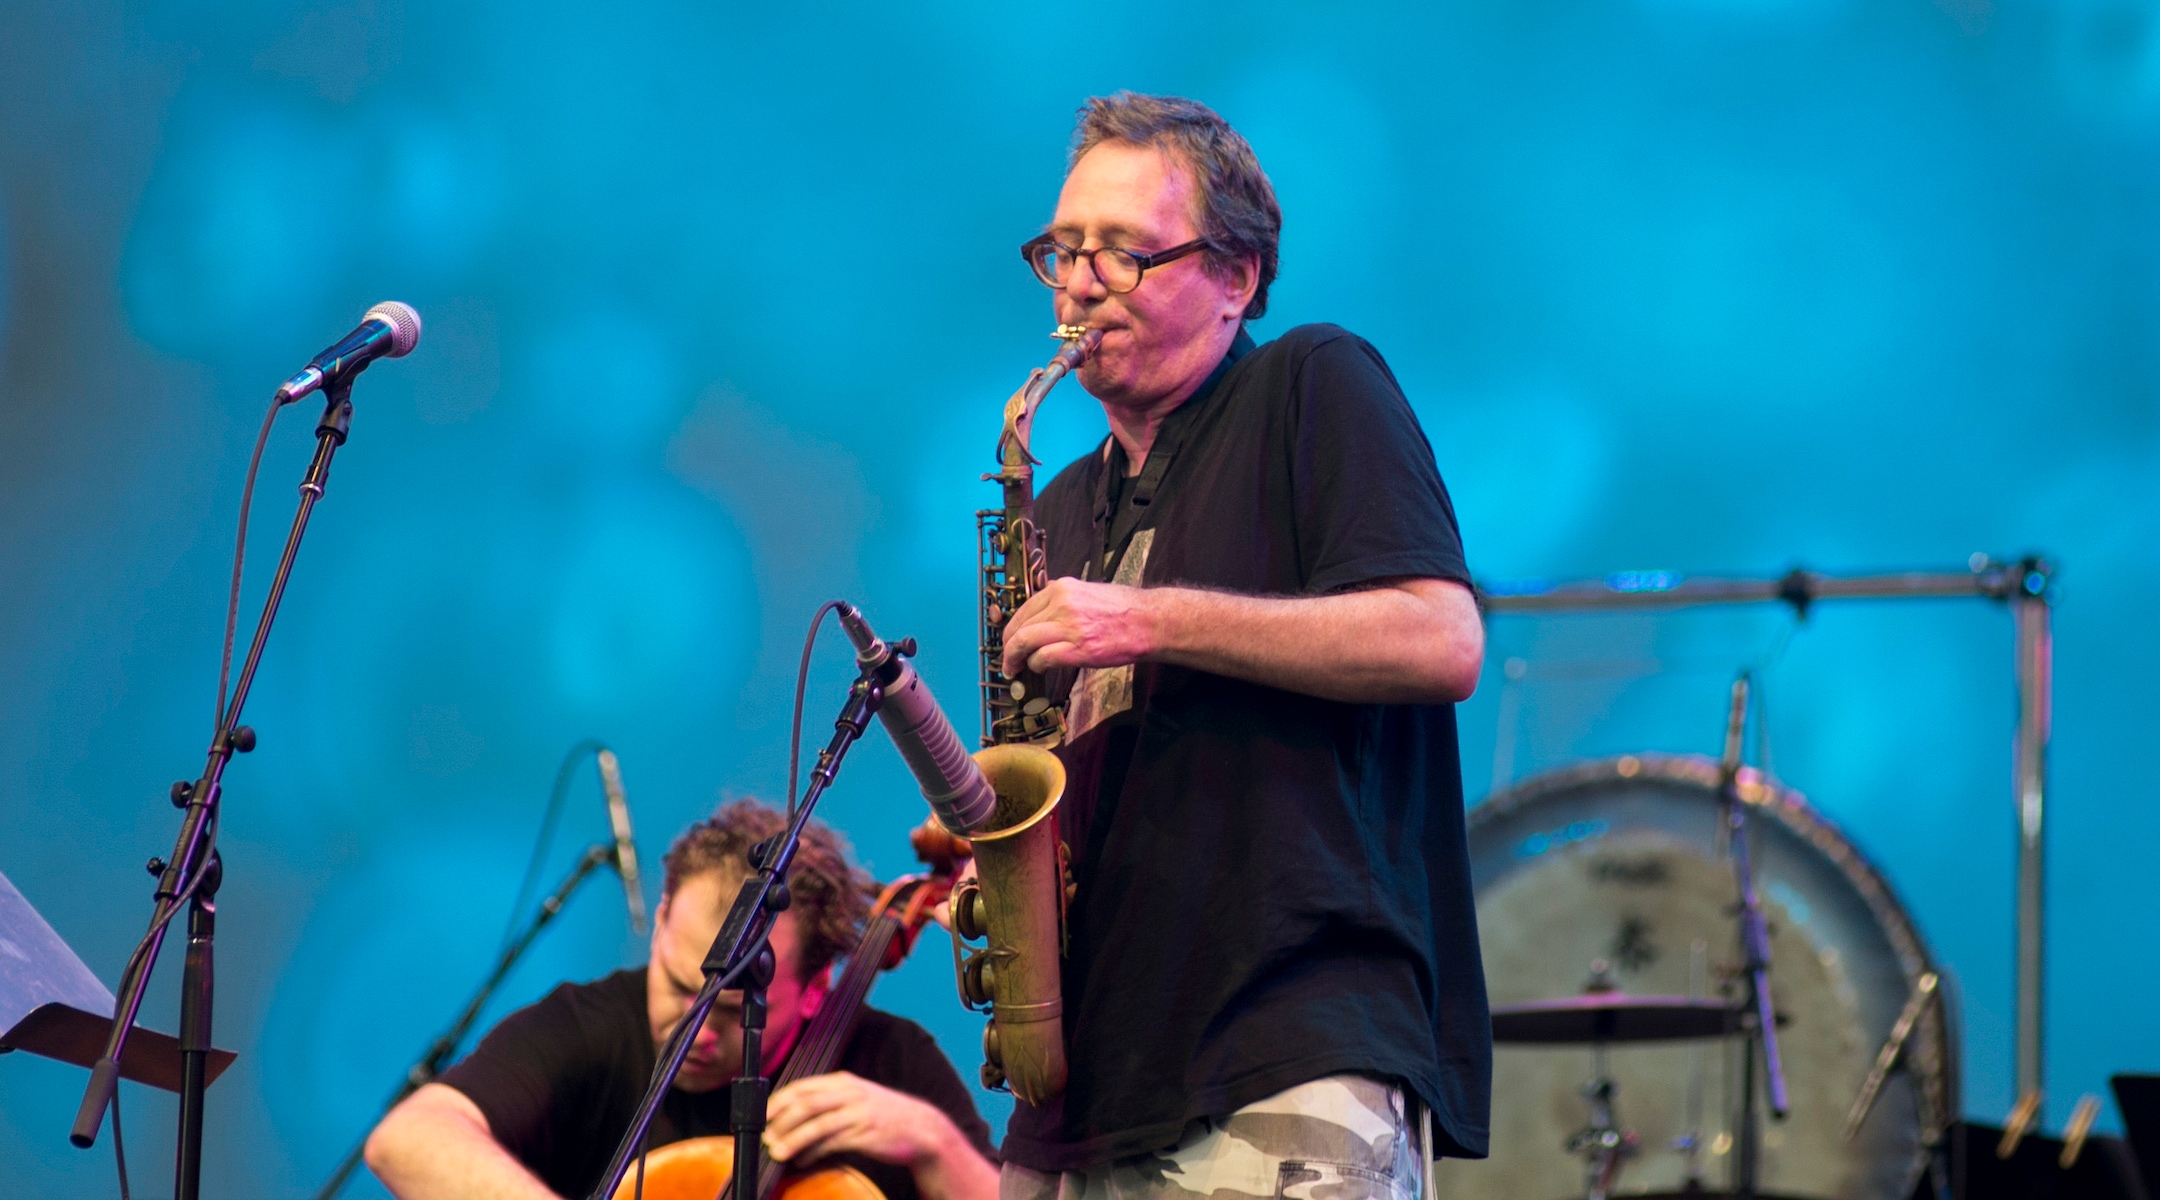 John Zorn performs in Damrosch Park at Lincoln Center, New York City, July 30, 2016. (Ebet Roberts/Redferns via Getty Images)